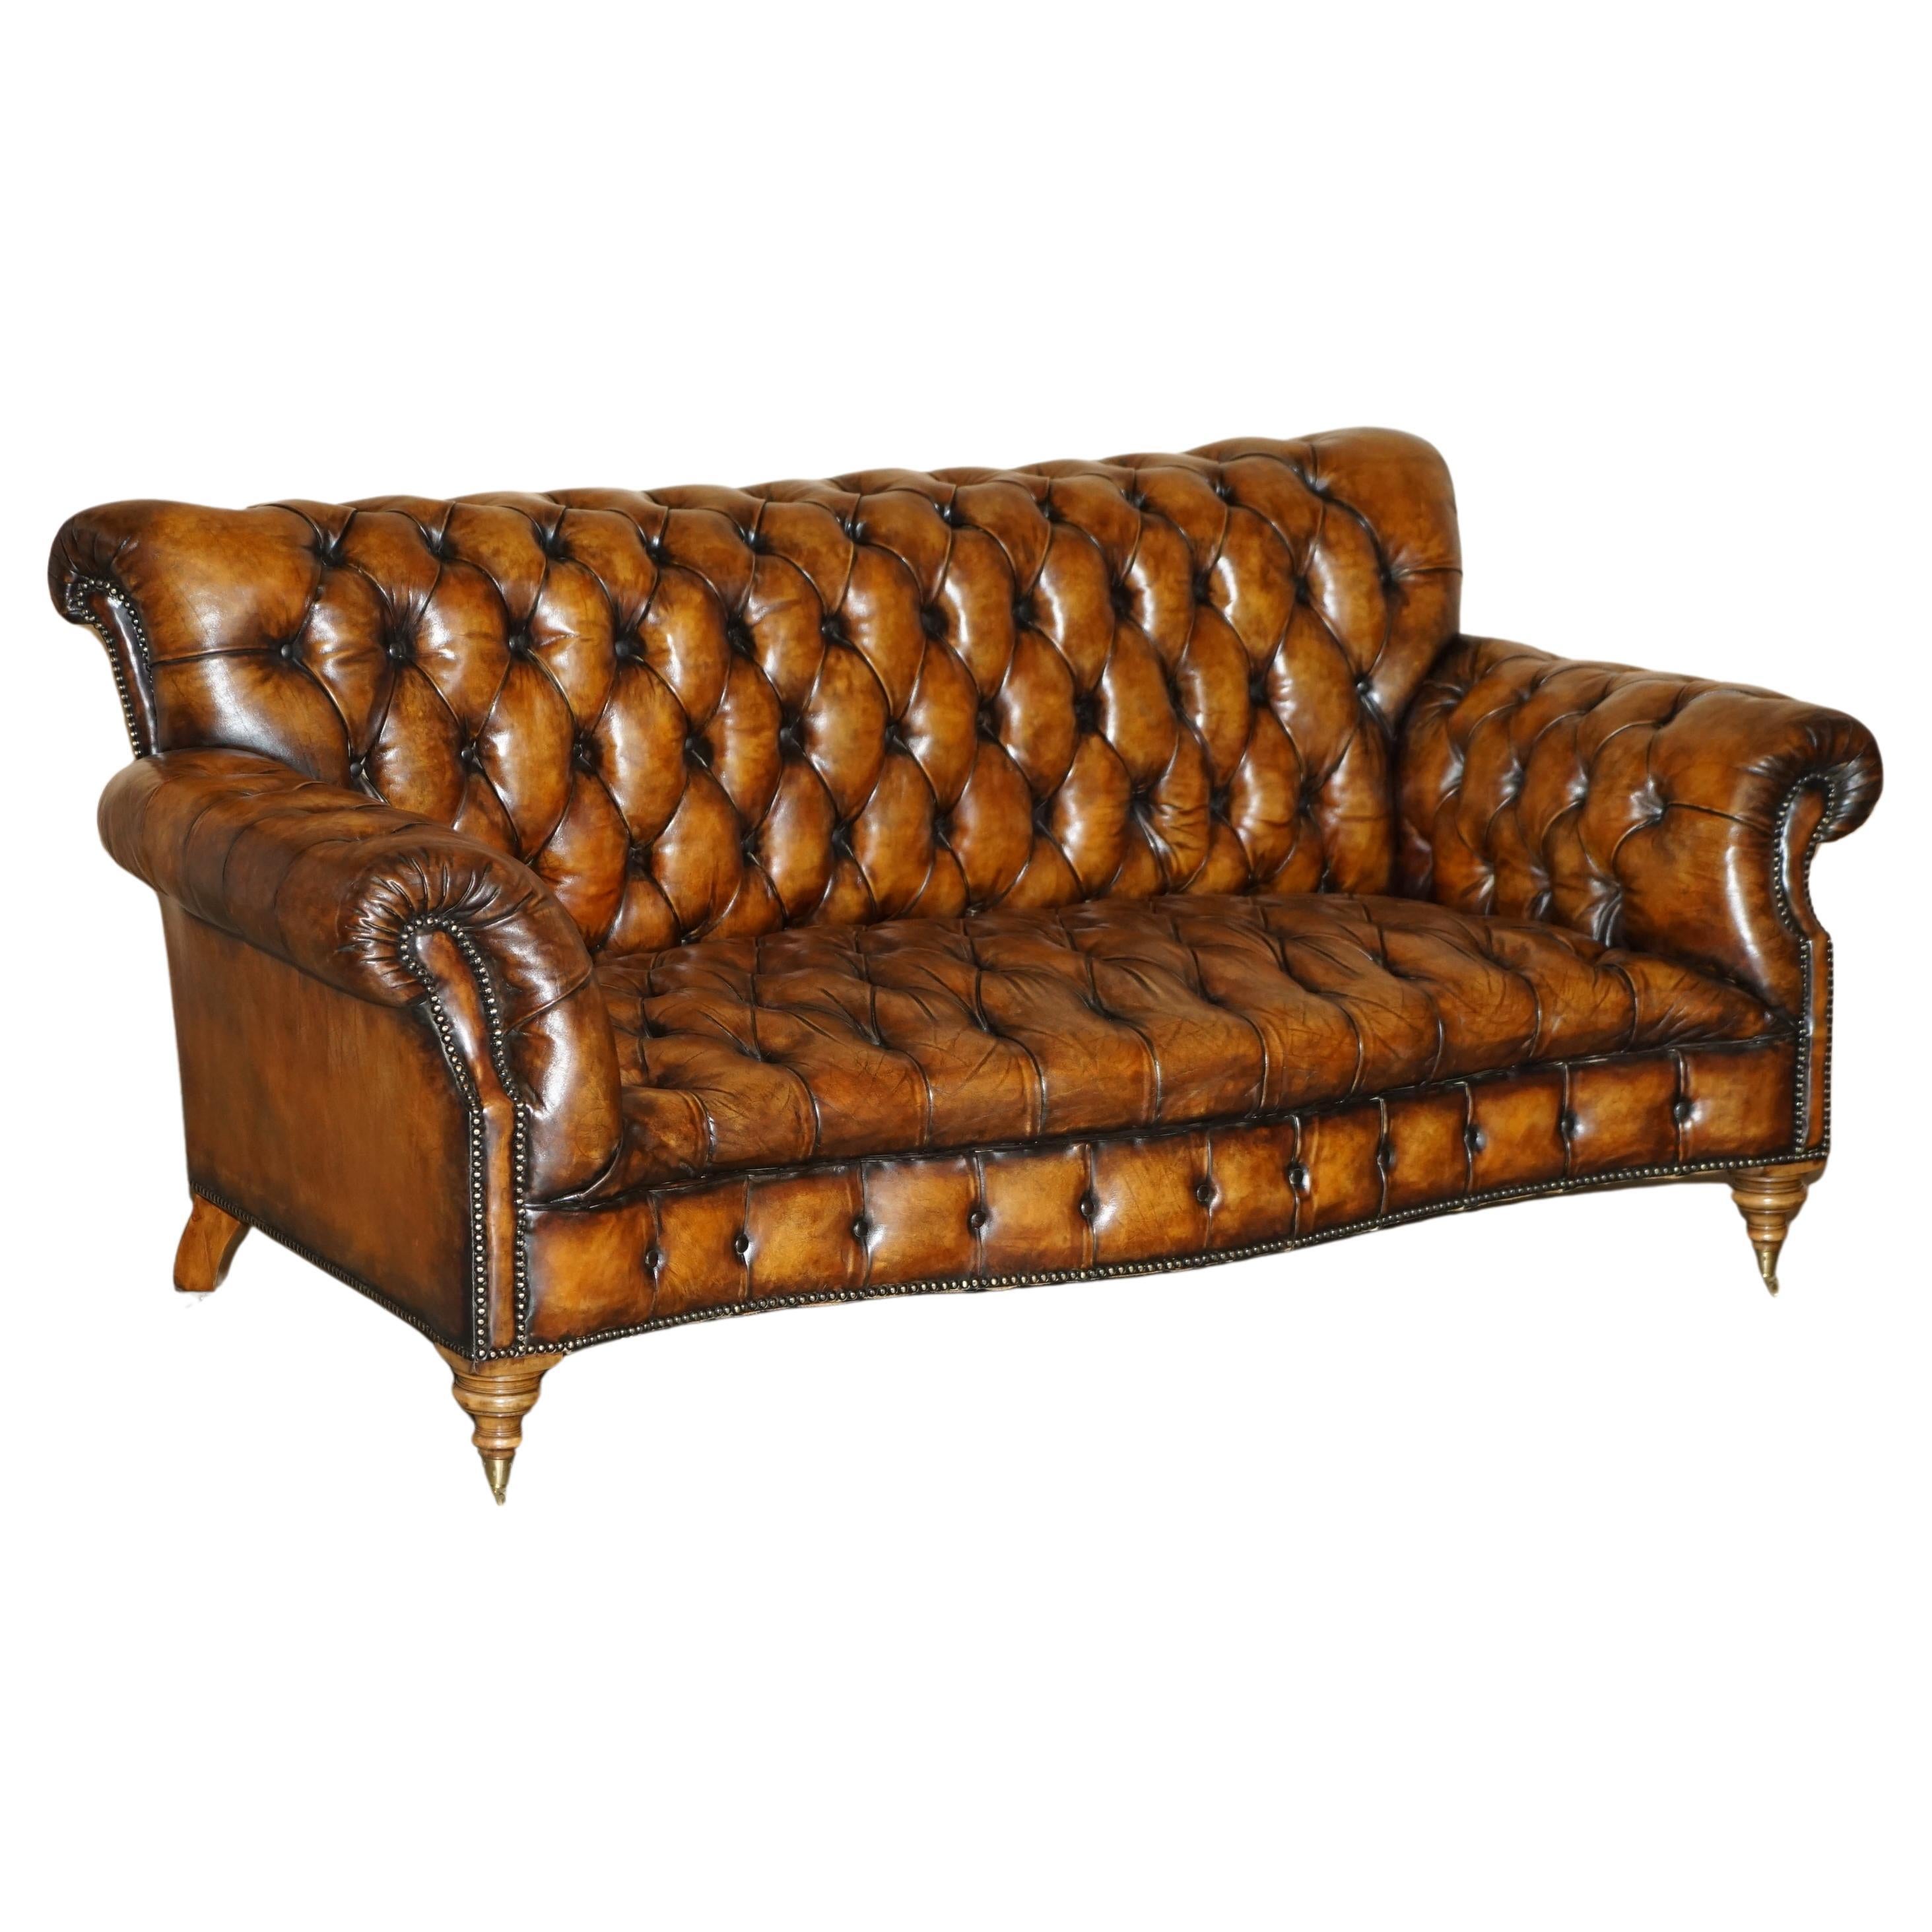 SOFA VICtoriaN SERPENTINE FRONTED HAND DYED RESTORED BROWN LEATHER CHESTERFiELD